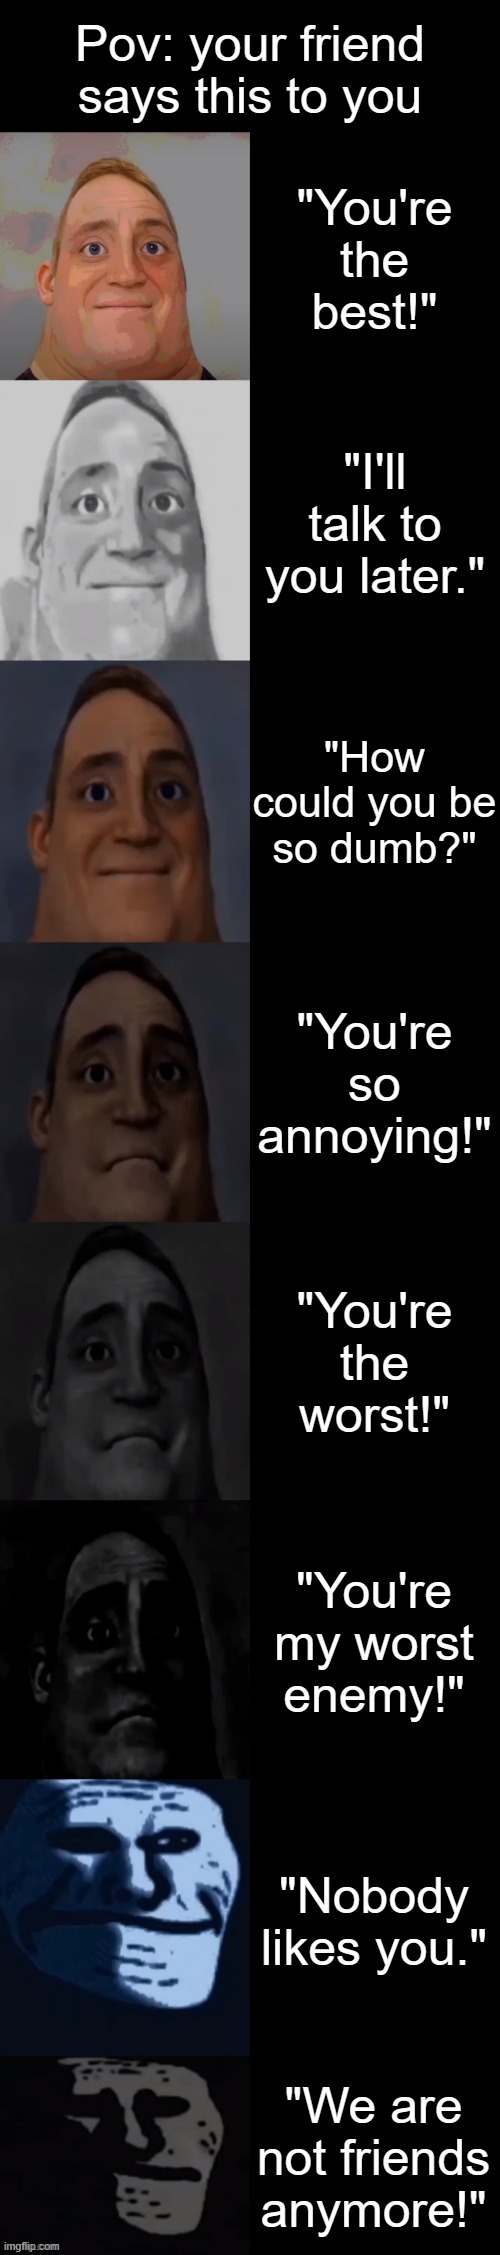 Mr Incredible becoming sad: your friend says this to you | Pov: your friend says this to you; "You're the best!"; "I'll talk to you later."; "How could you be so dumb?"; "You're so annoying!"; "You're the worst!"; "You're my worst enemy!"; "Nobody likes you."; "We are not friends anymore!" | image tagged in mr incredible becoming sad | made w/ Imgflip meme maker